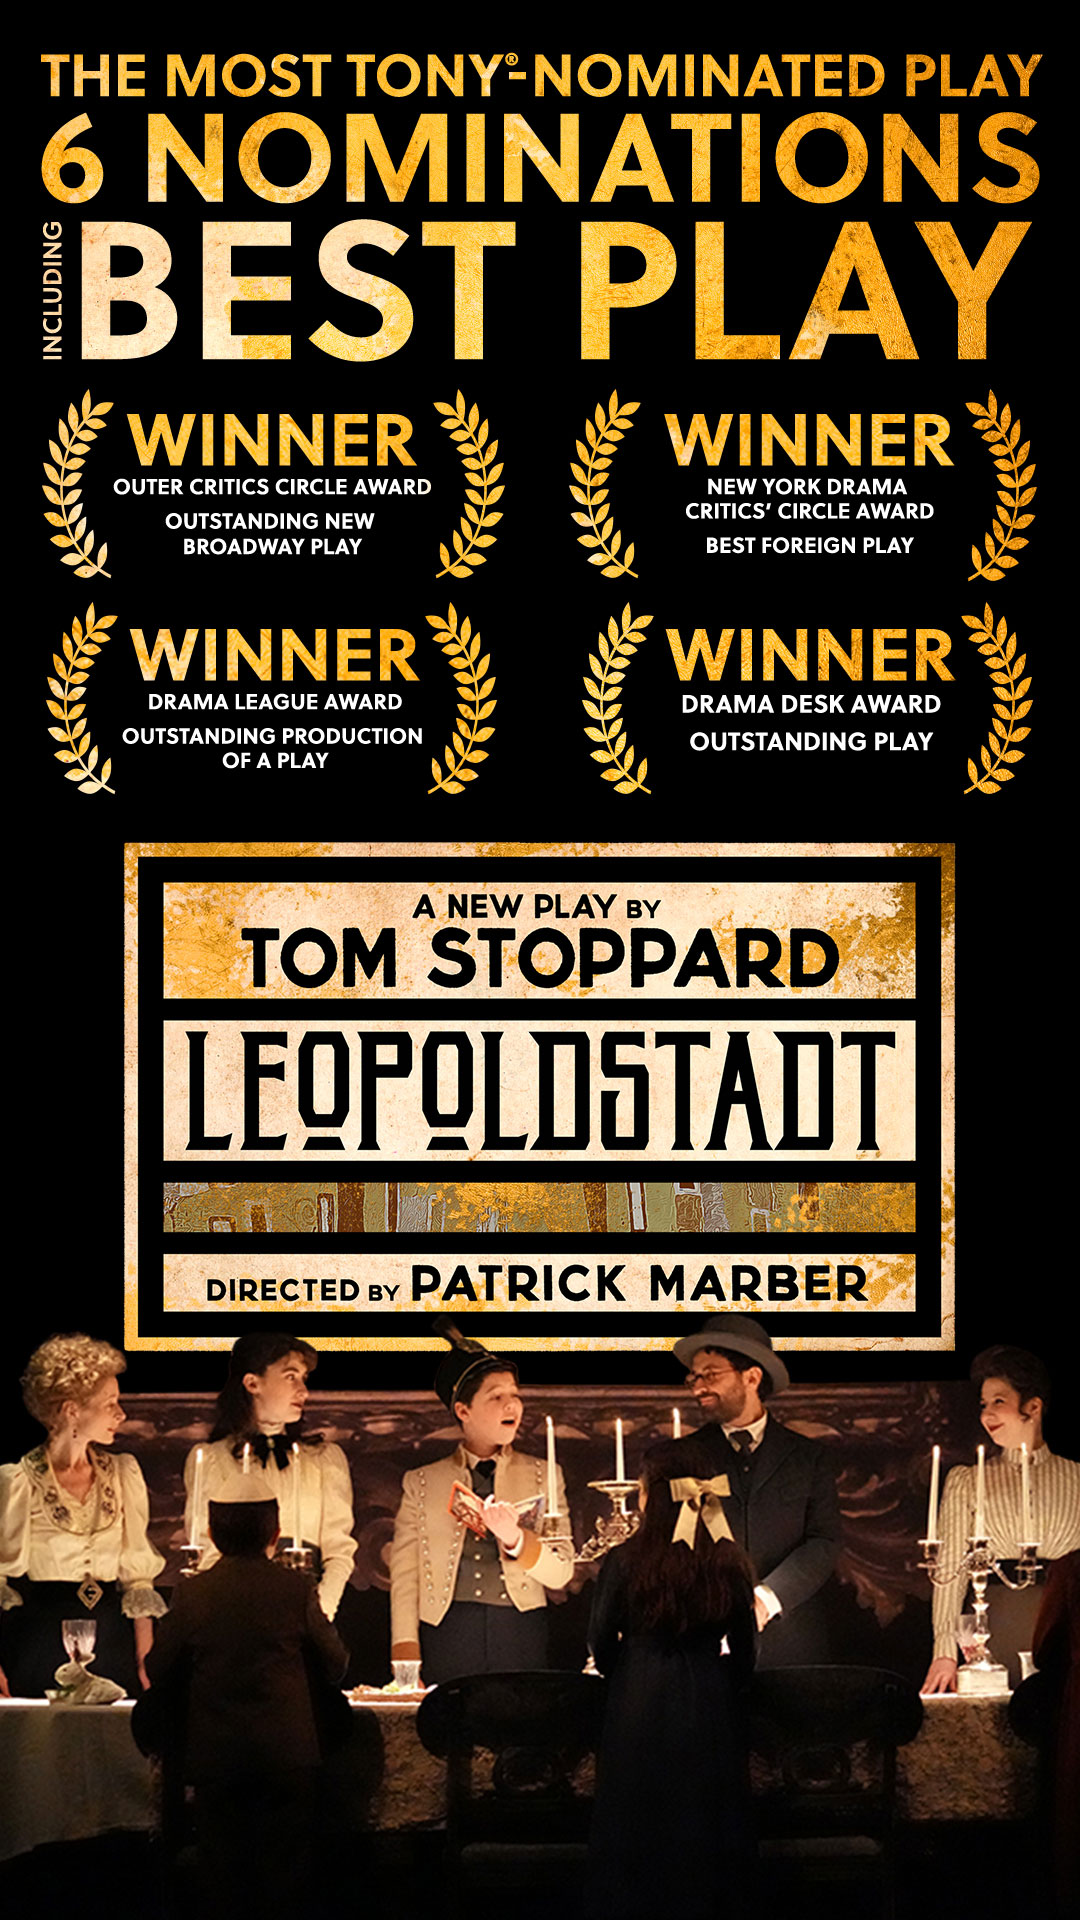 Leopoldstadt | Most Nominated New Broadway Play - Outer Critics Circle Awards | Outstanding Production of a Play | Drama League Award Nominee